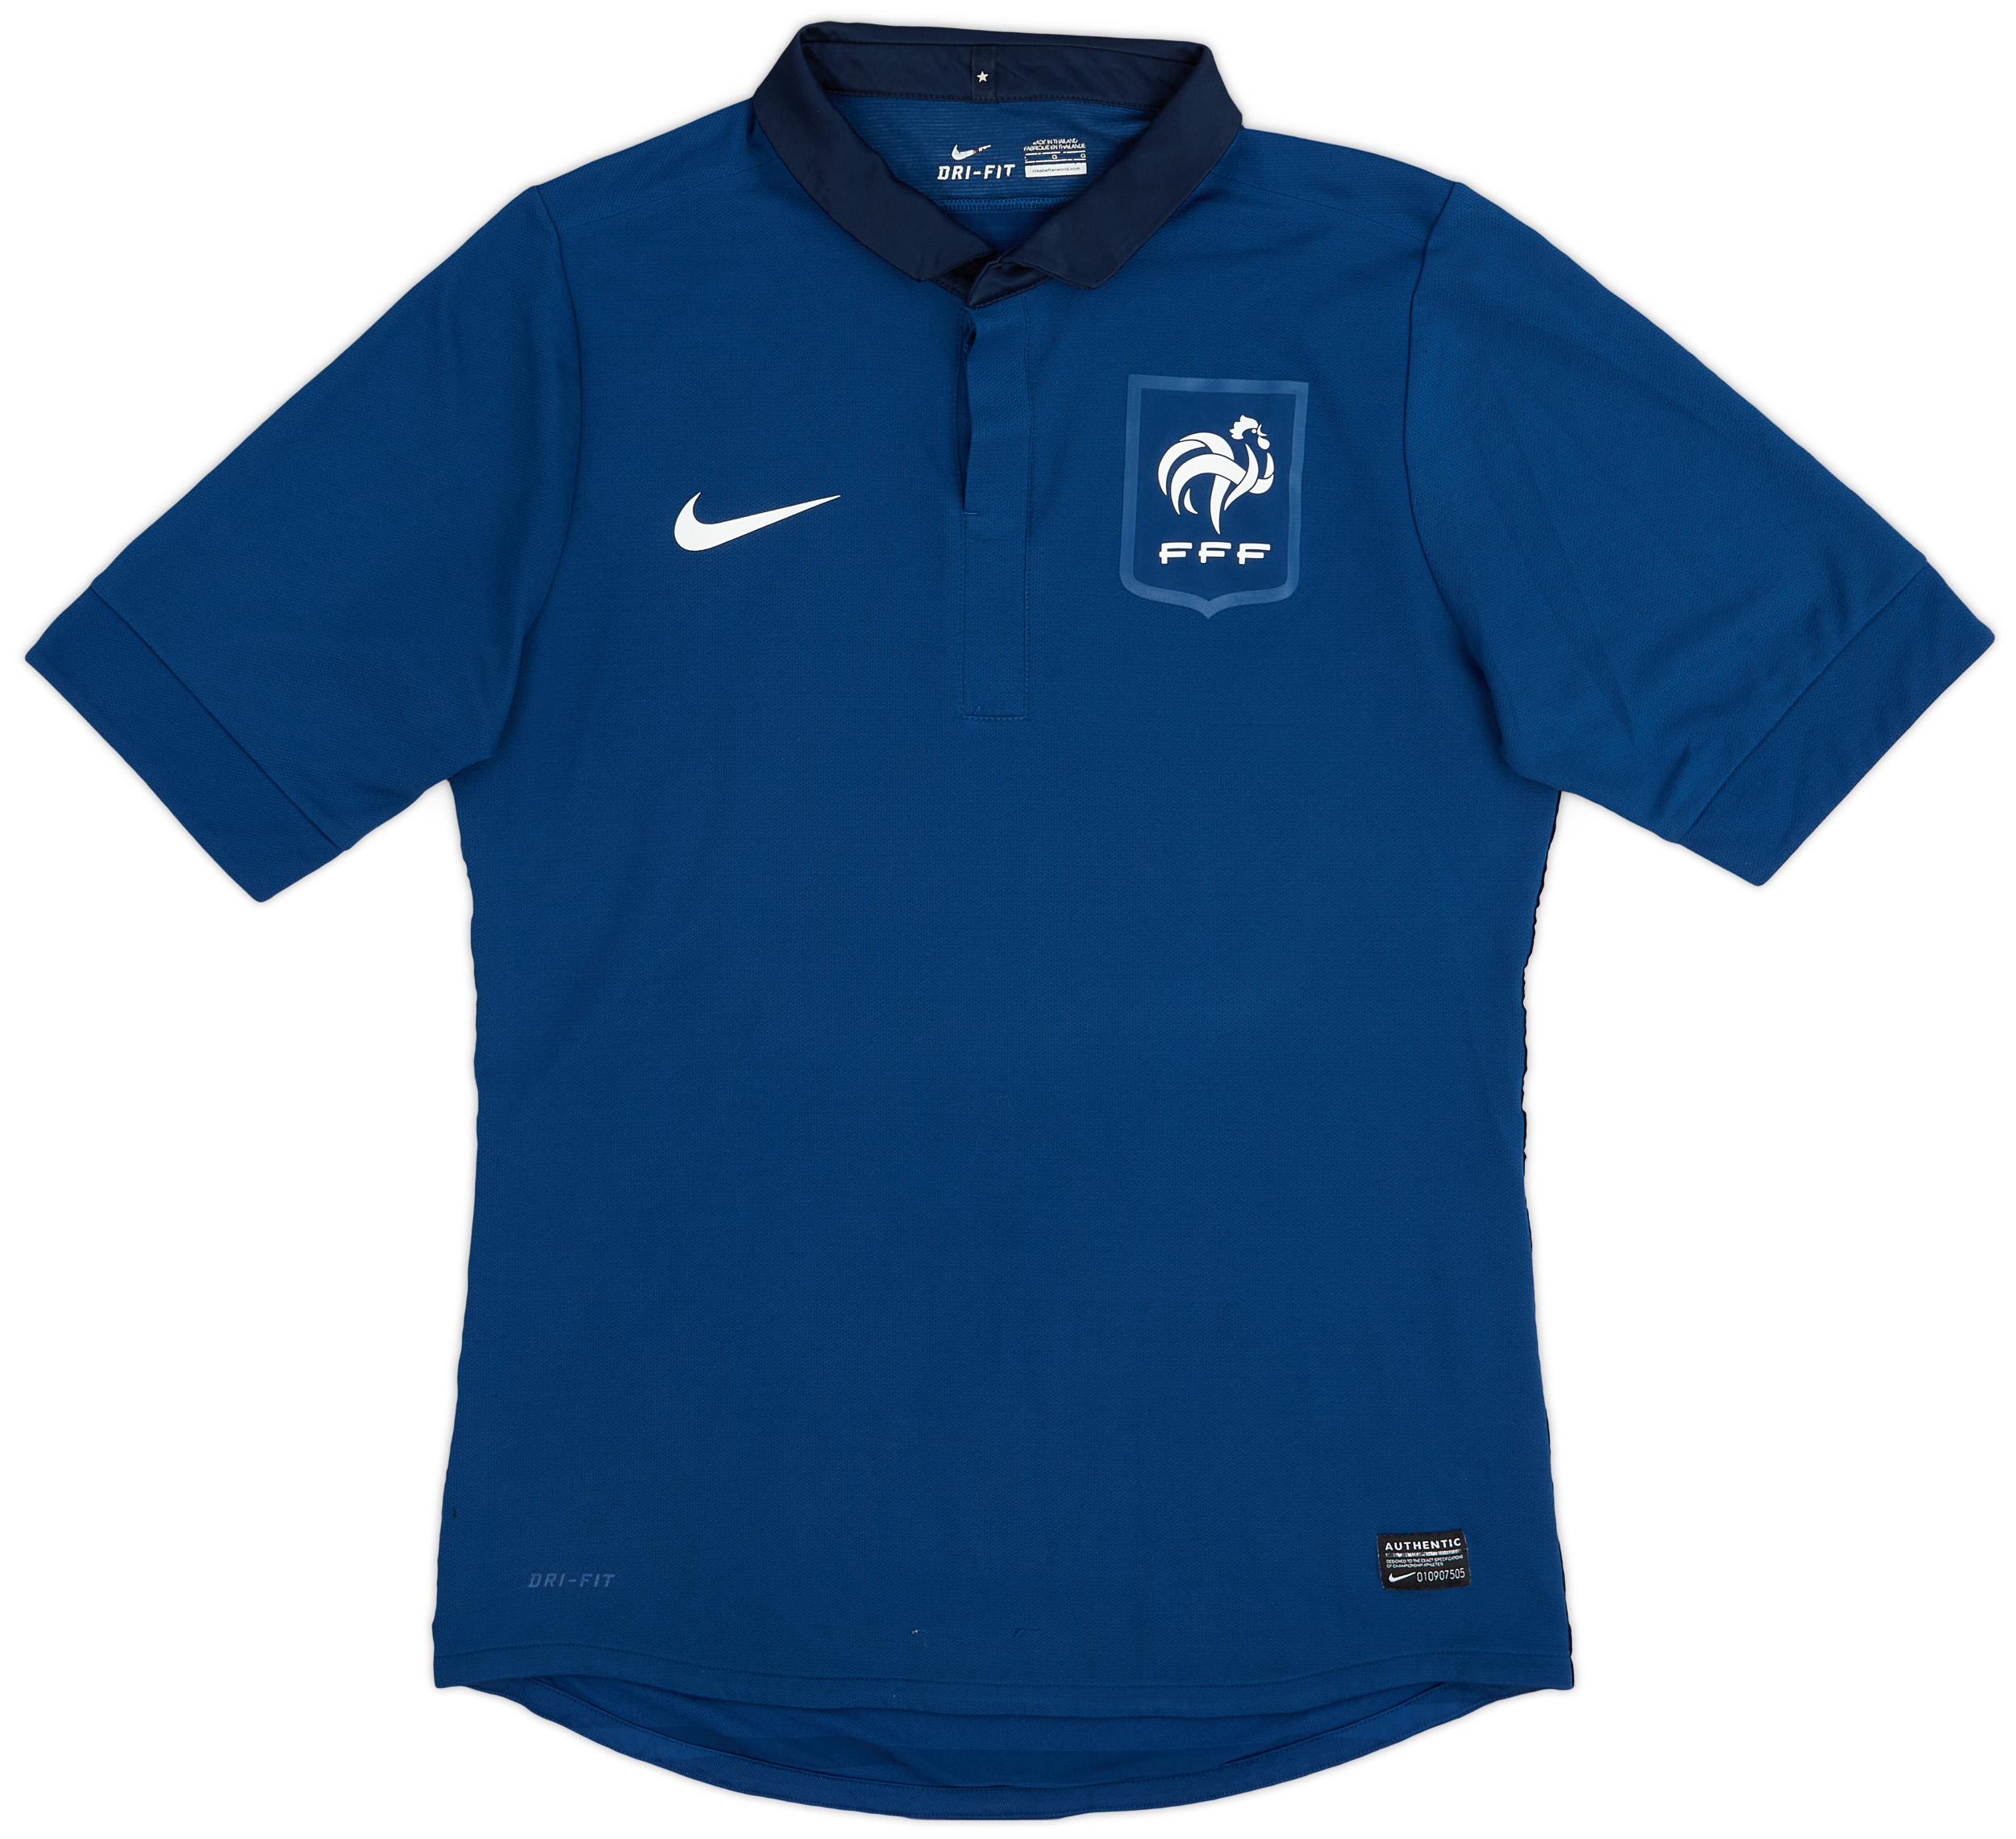 2011-12 France Authentic Home Shirt - 8/10 - ()